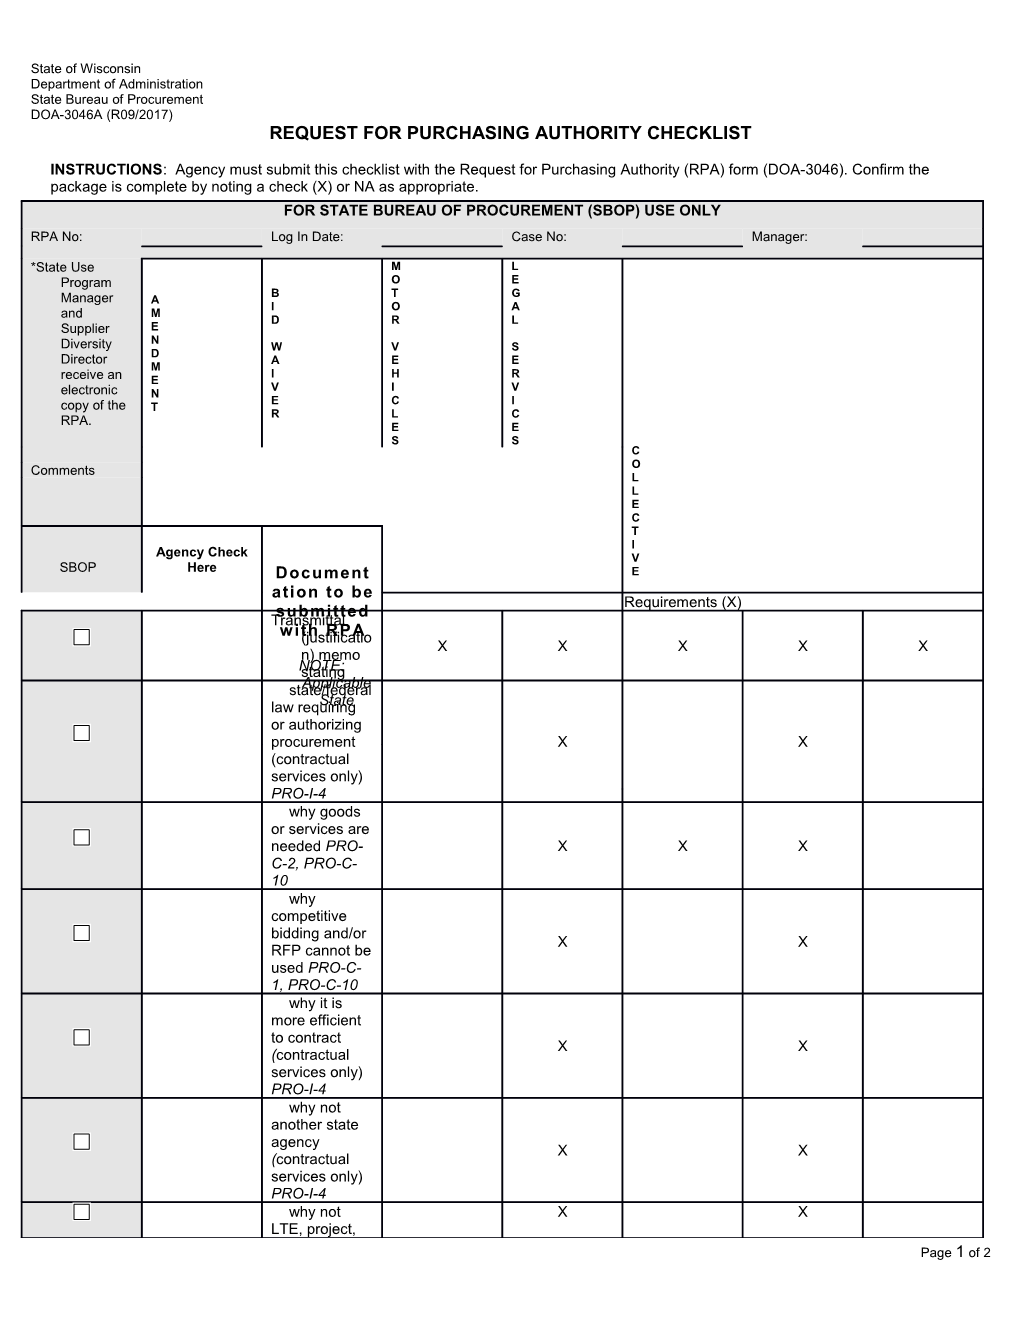 Request for Purchasing Authority Checklist